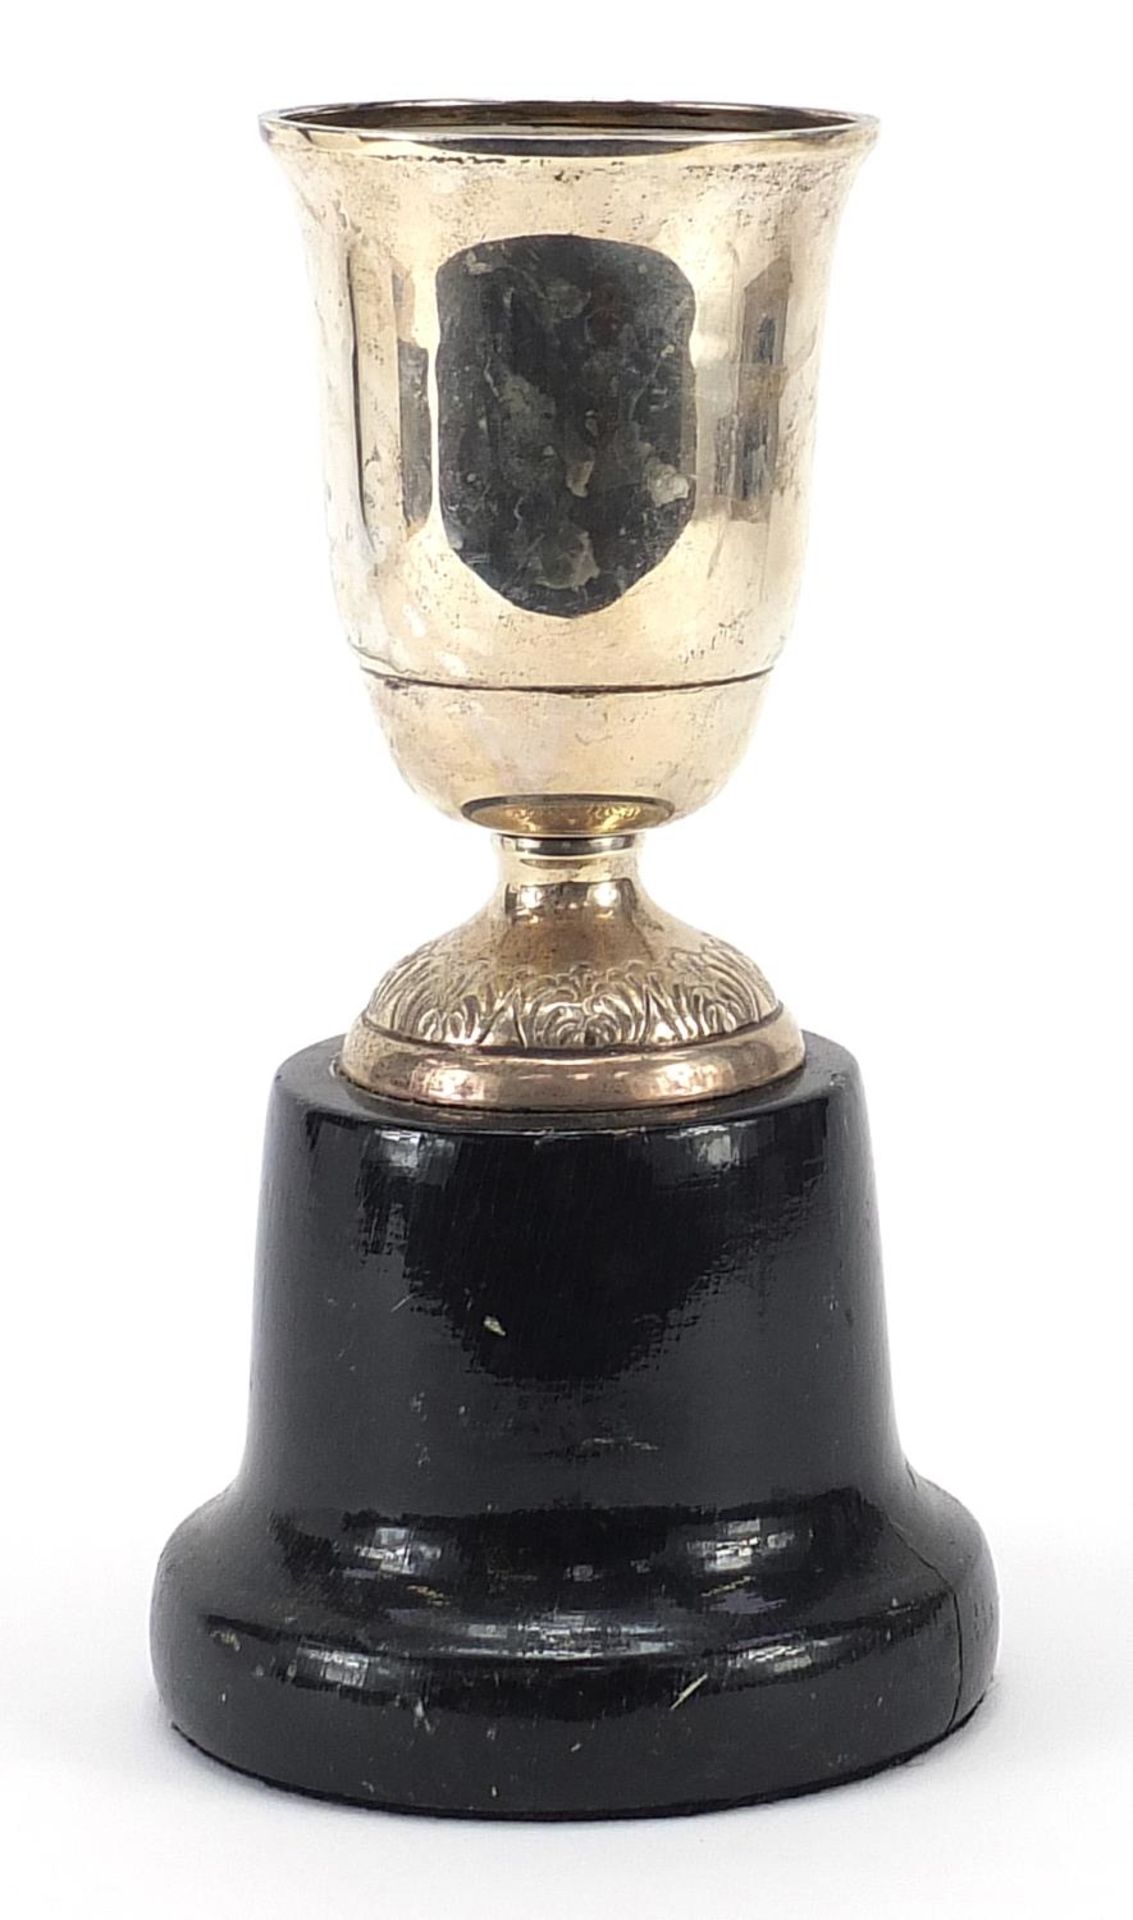 Spanish silver equestrian interest trophy raised an ebonised wood base, 22cm high, total weight 414g - Image 2 of 4